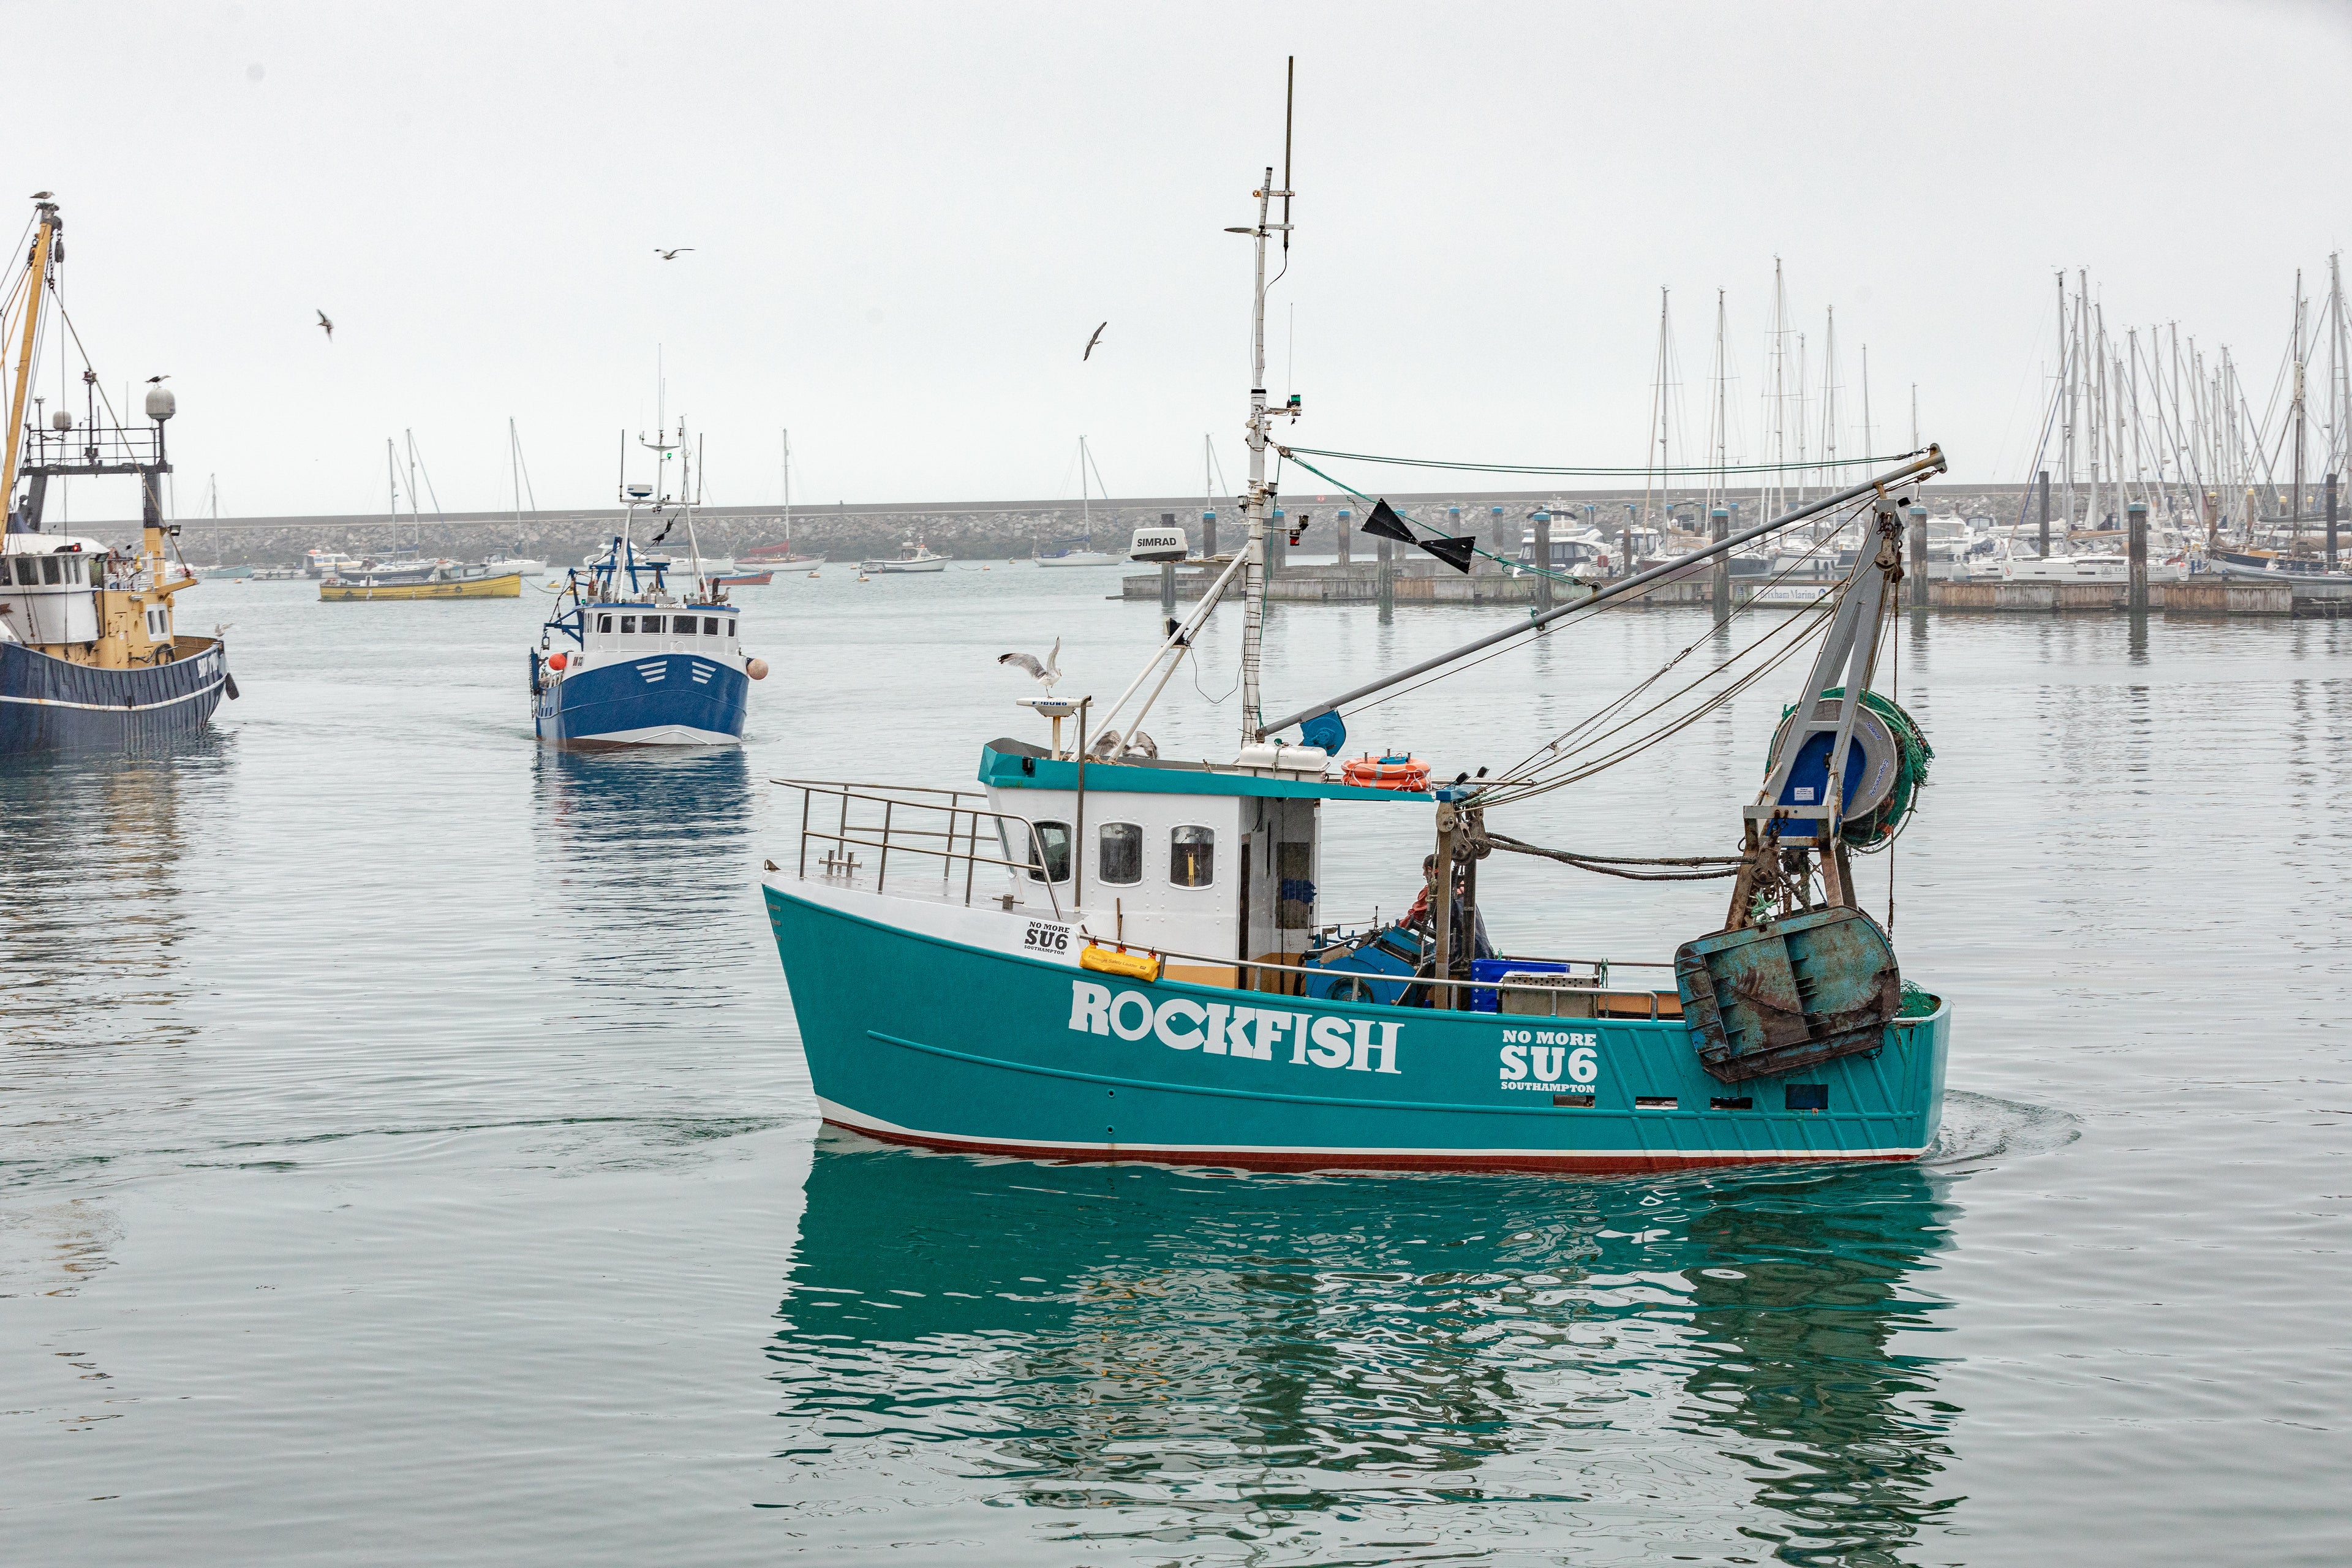 OUR BOAT ROCKFISHER – Rockfish